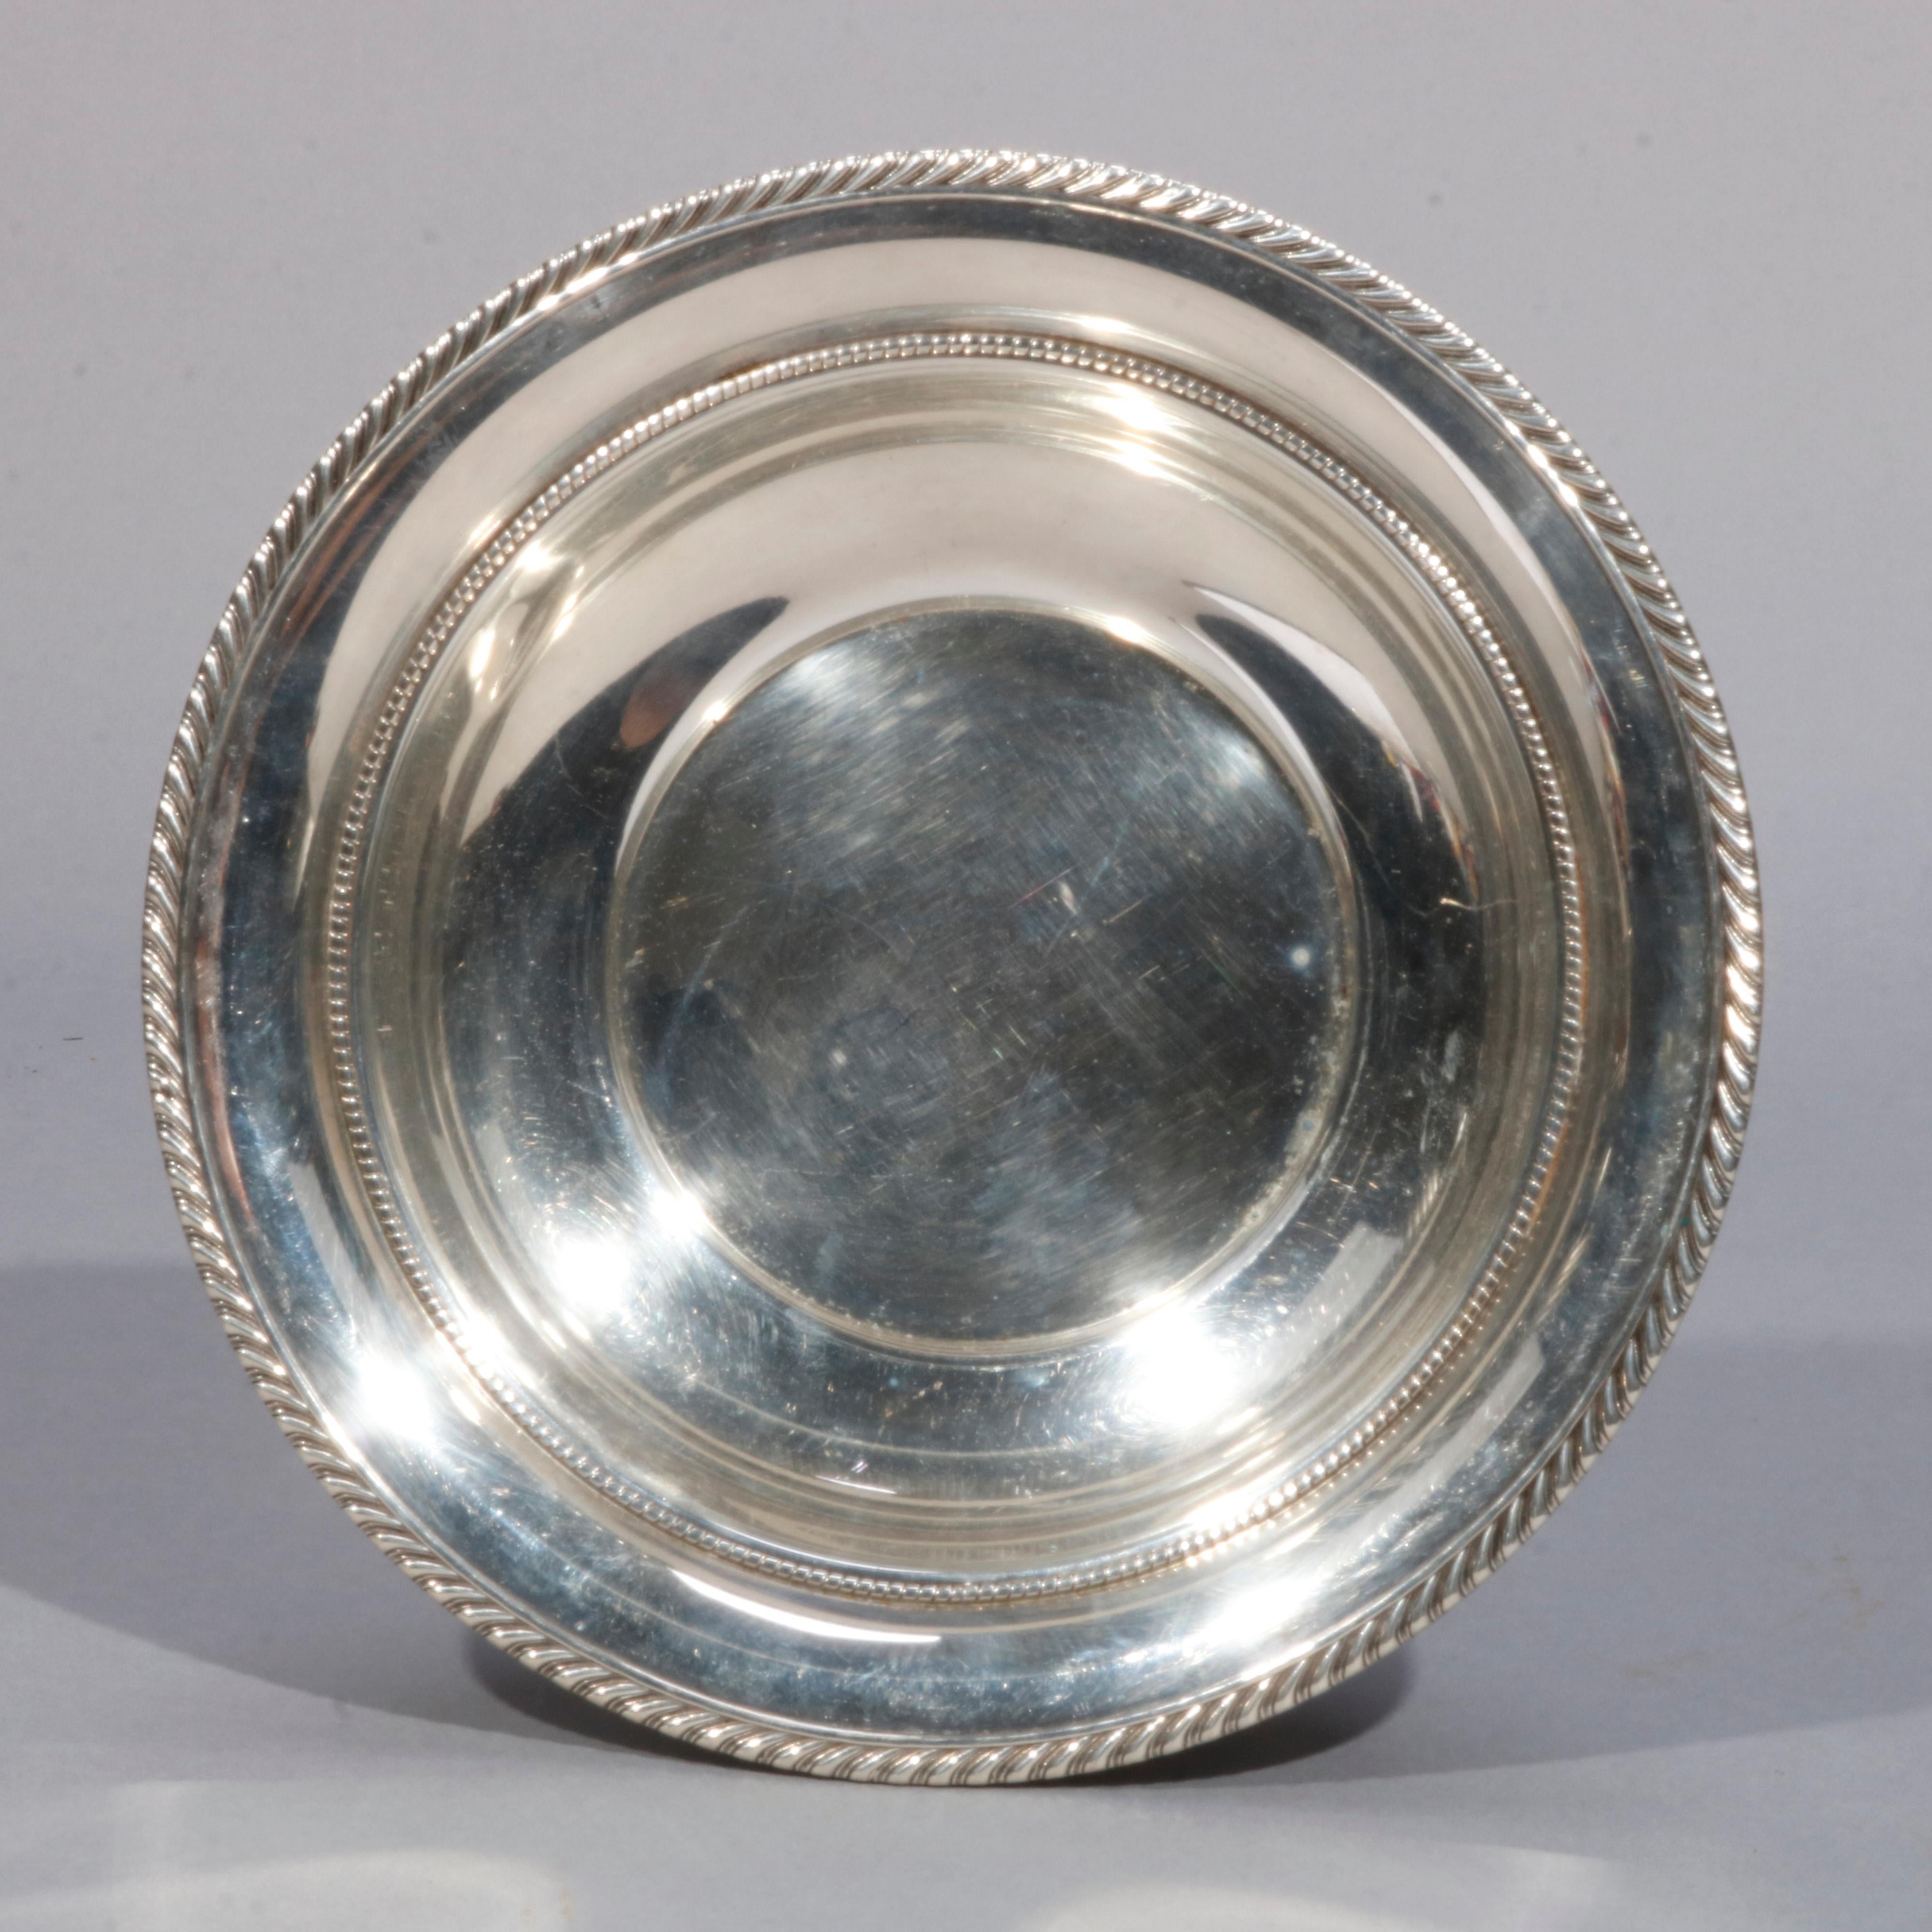 An antique serving bowl by Gorham offers sterling silver construction with gadrooned edge, maker marked on base as photographed, 8.3 toz, 20th century

Measures: 2